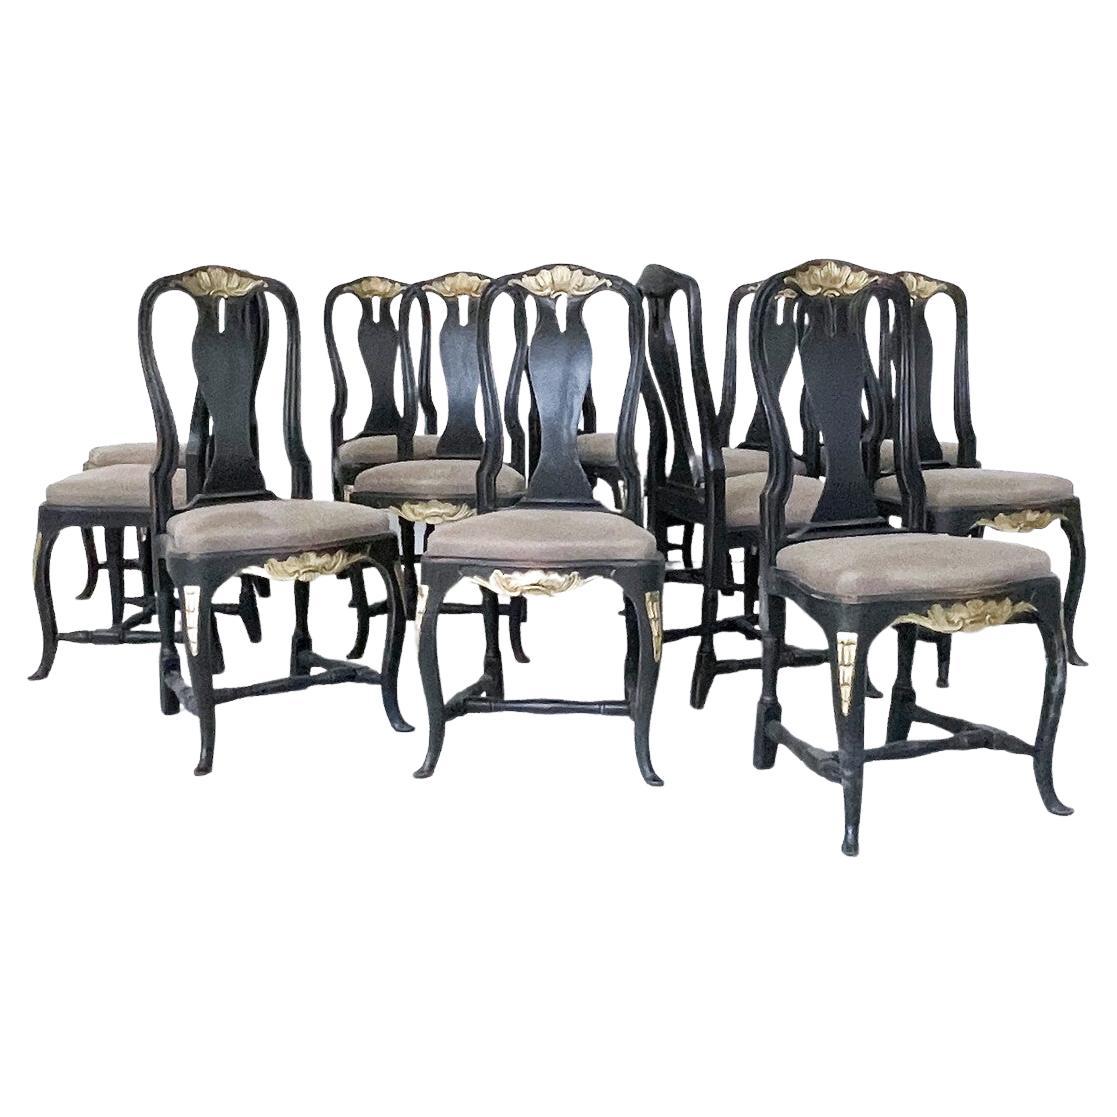 Set of 12 Swedish Chairs, XVIIIe Style, Black Wood and Fabric (sold per piece)